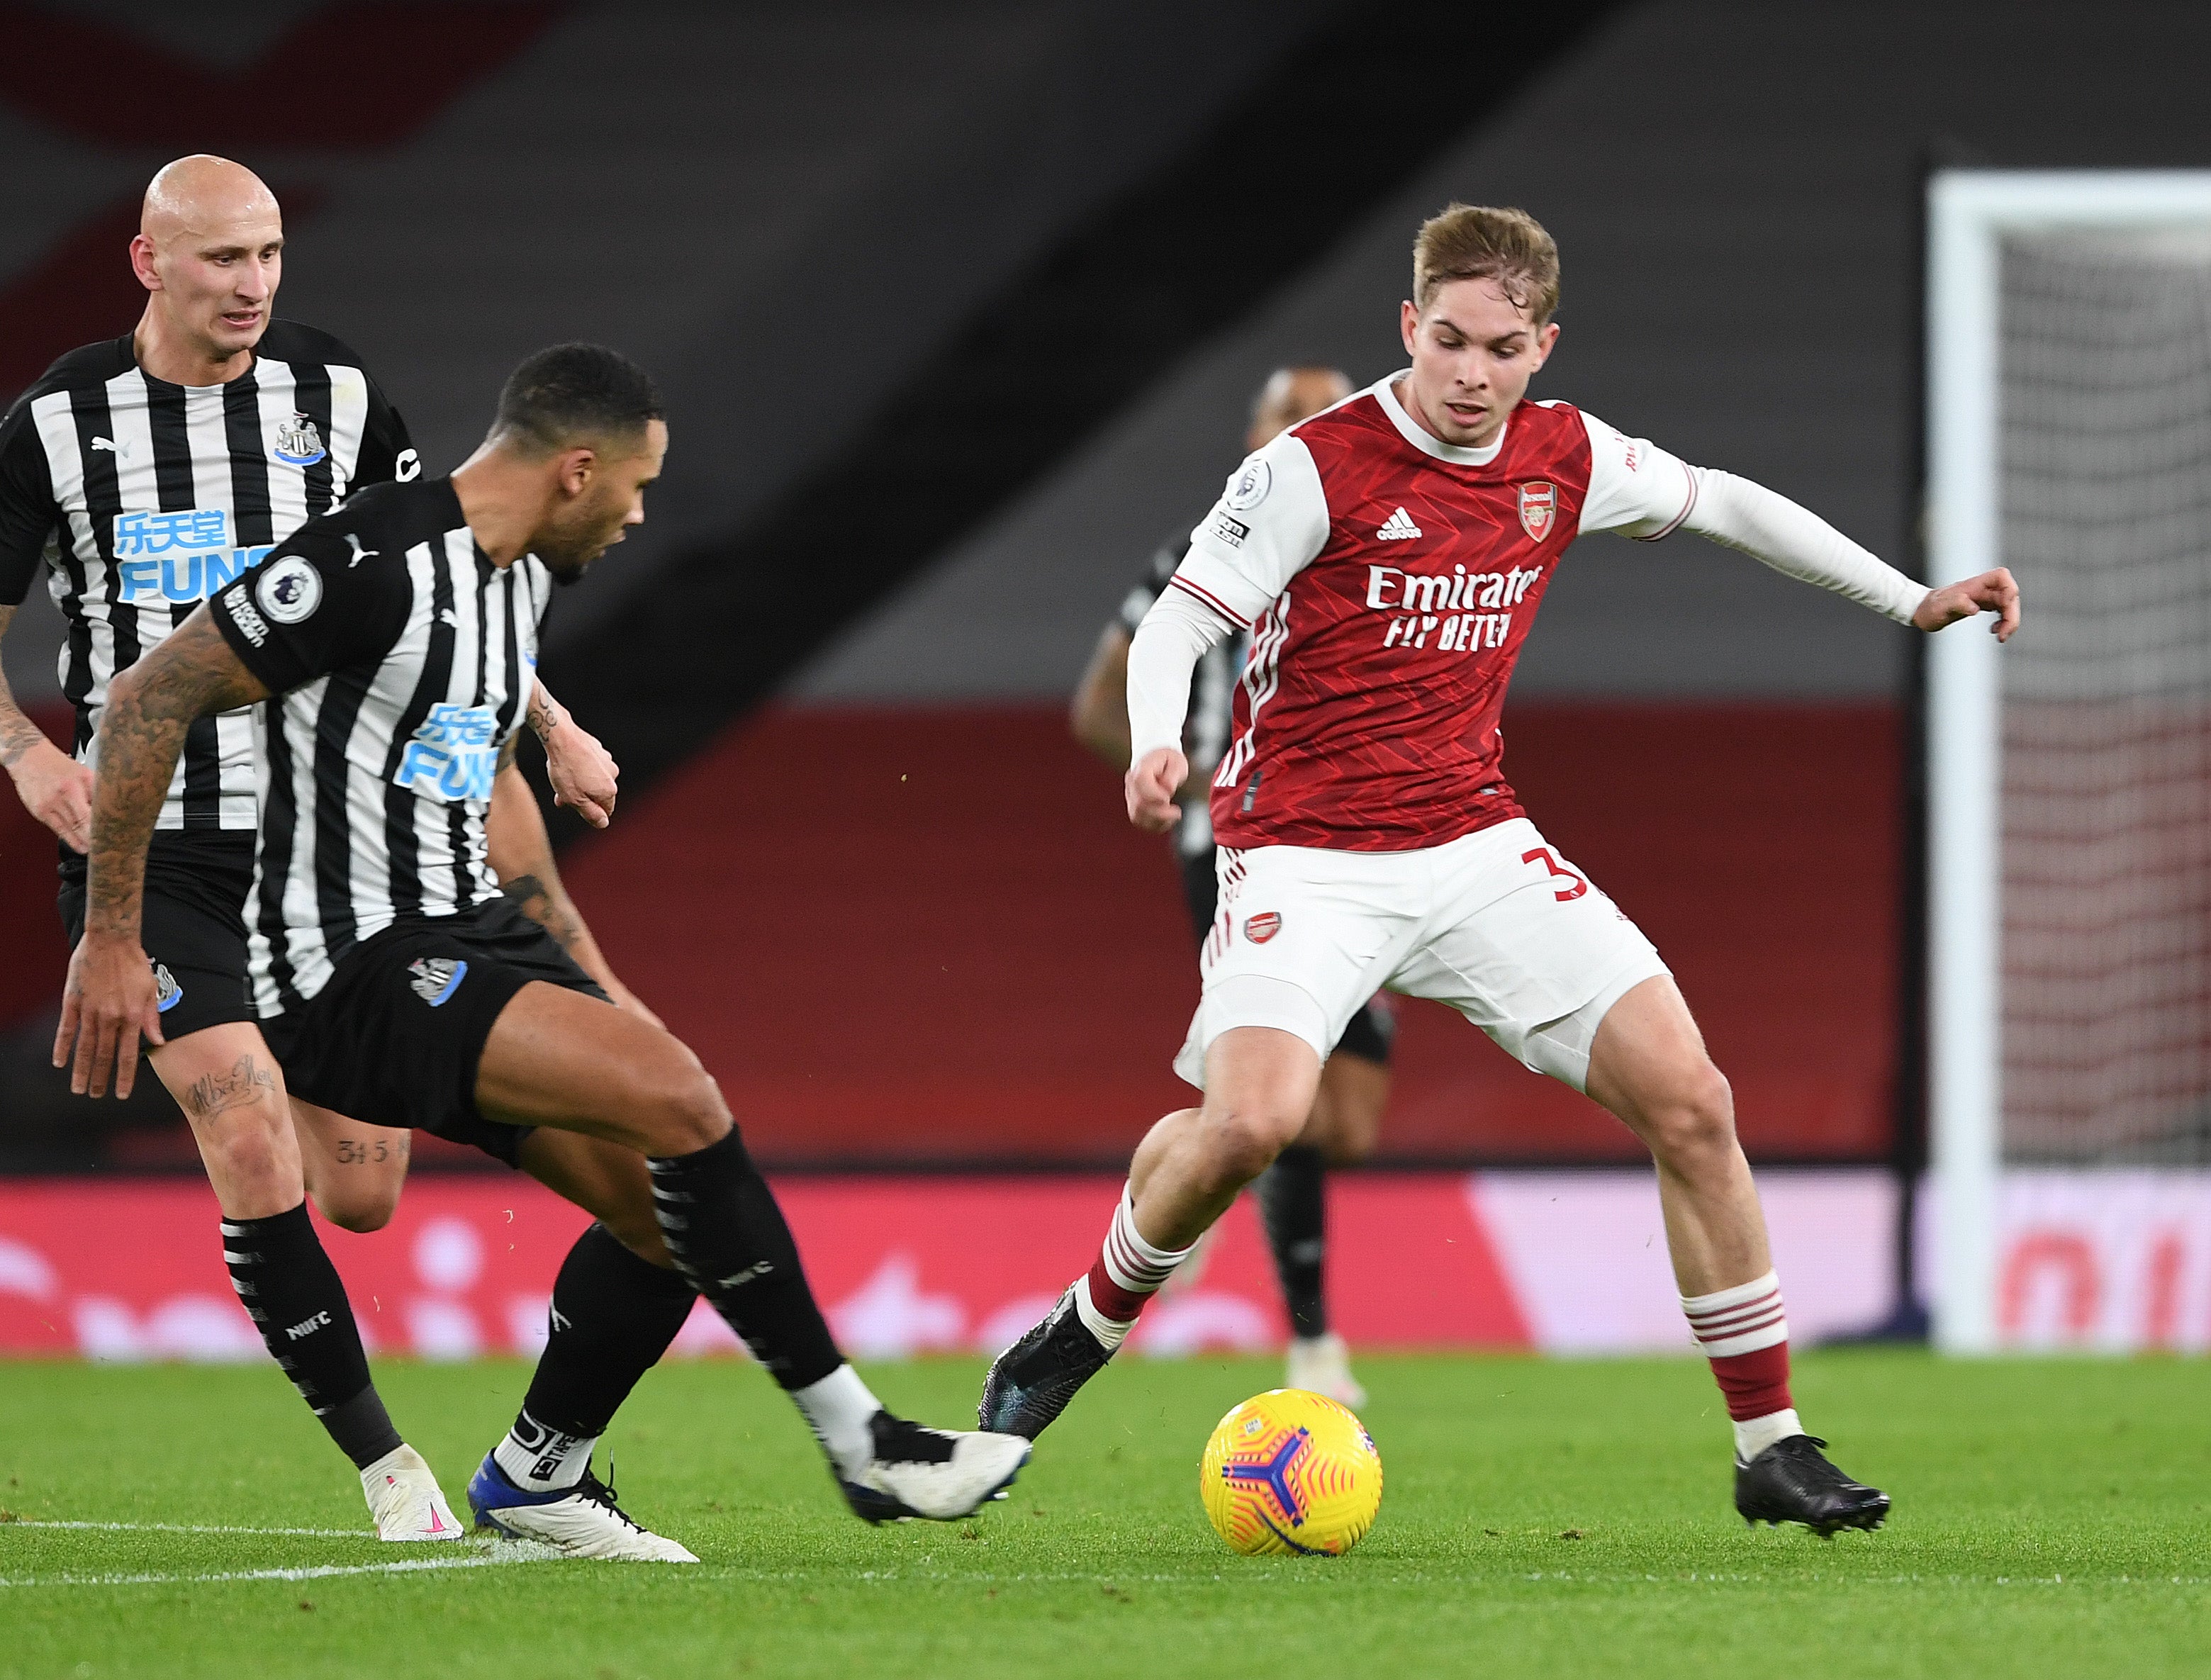 Emile Smith Rowe is composed on the ball